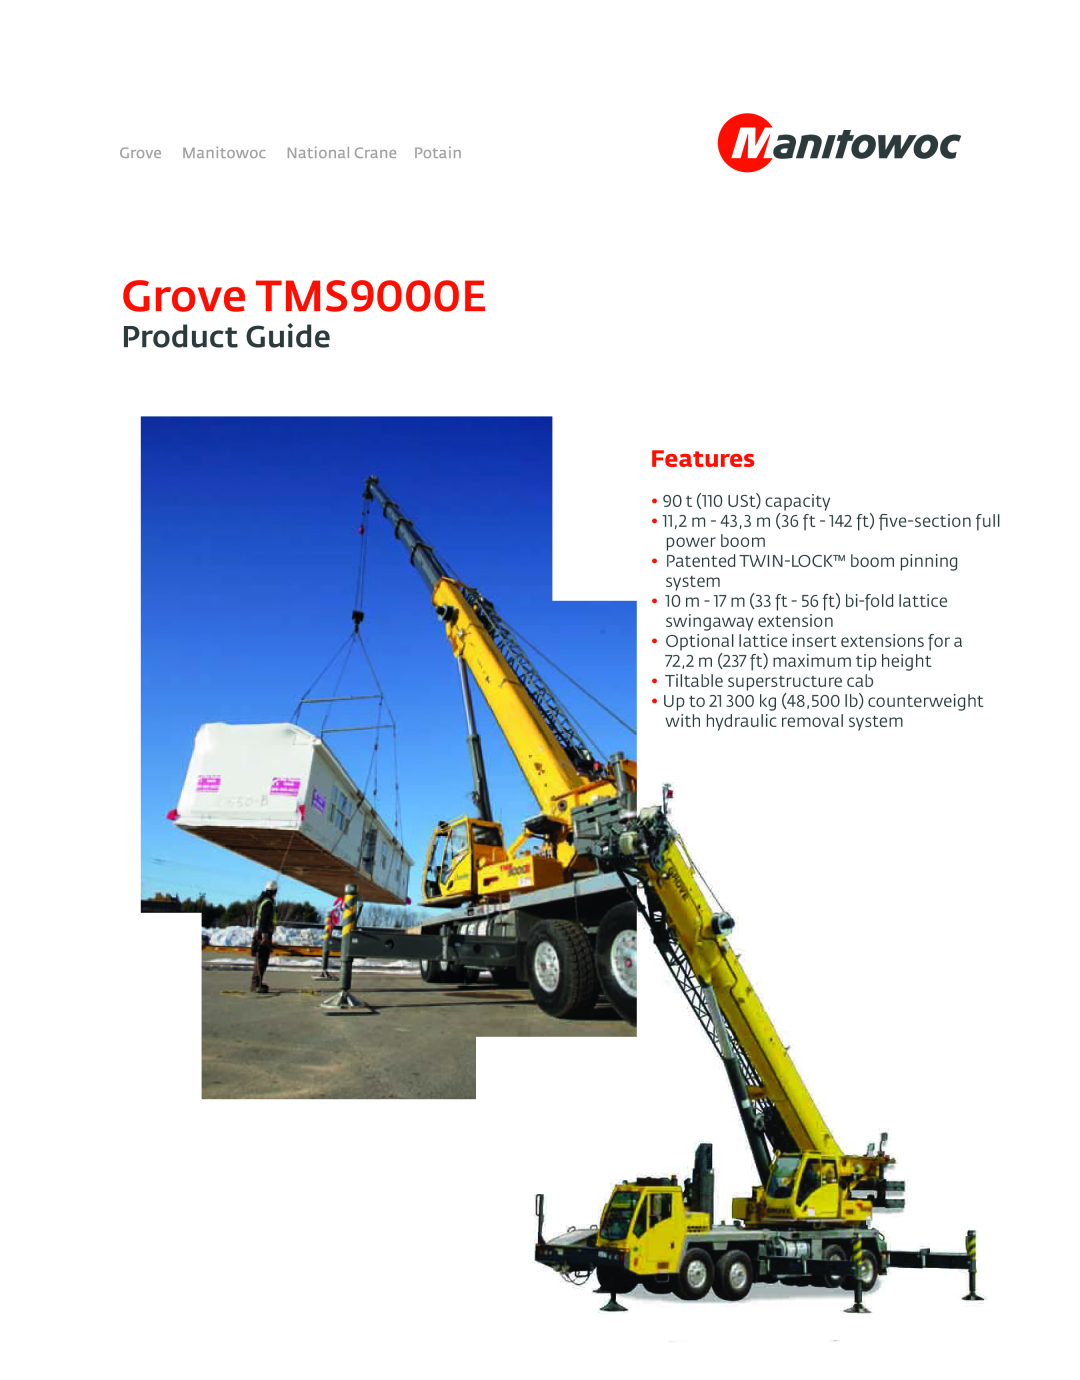 Manitowoc Ice manual Grove TMS9000E, Product Guide, Features, 90 t 110 USt capacity, Tiltable superstructure cab 